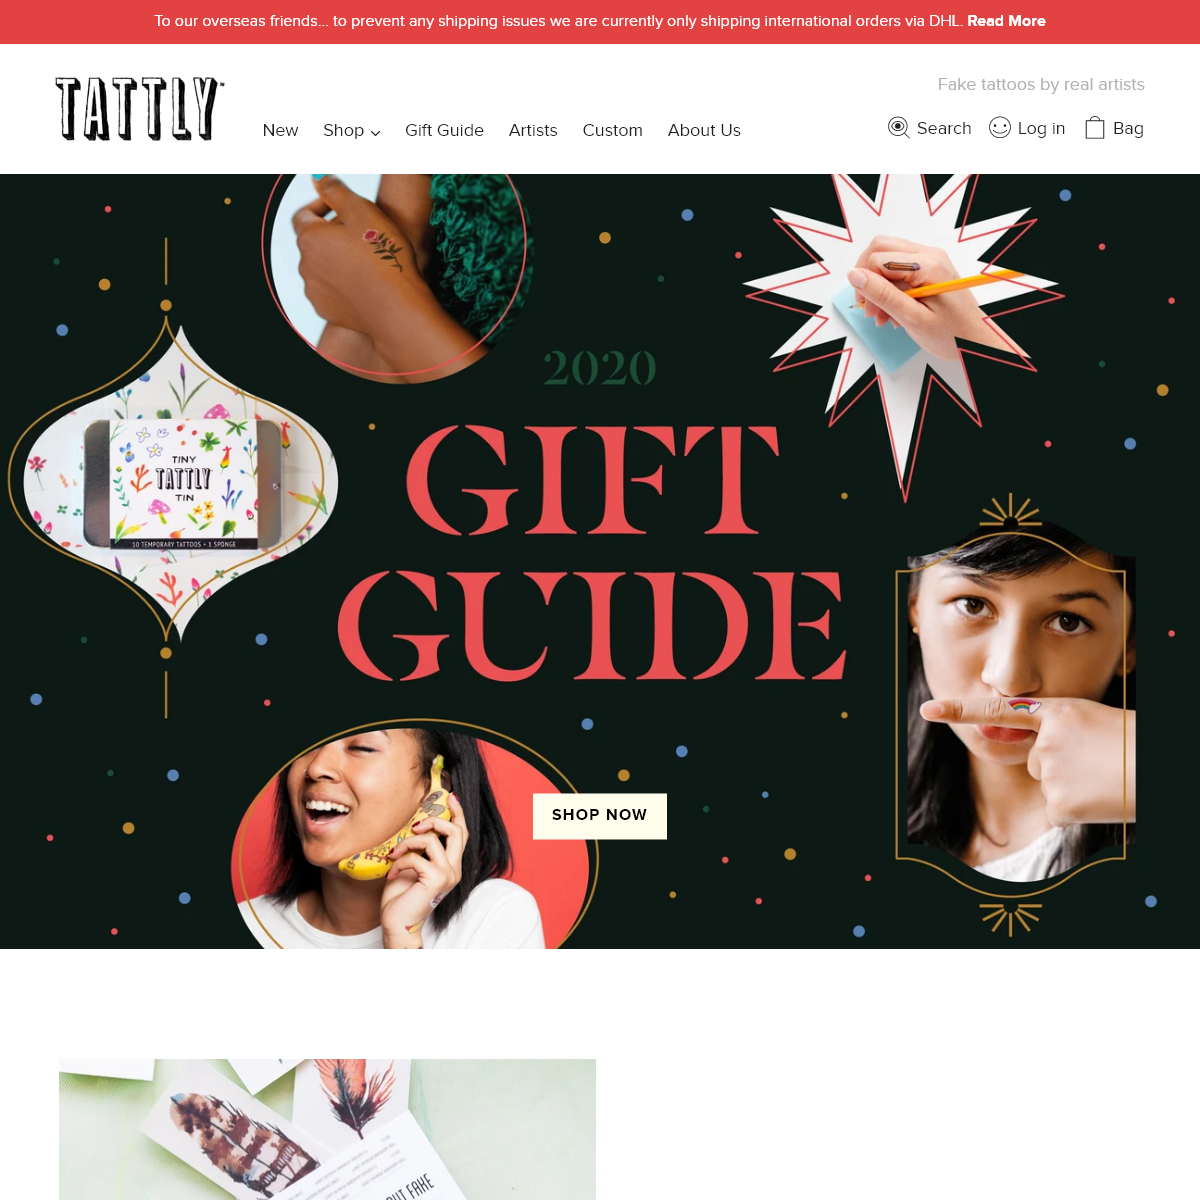 A complete backup of tattly.com